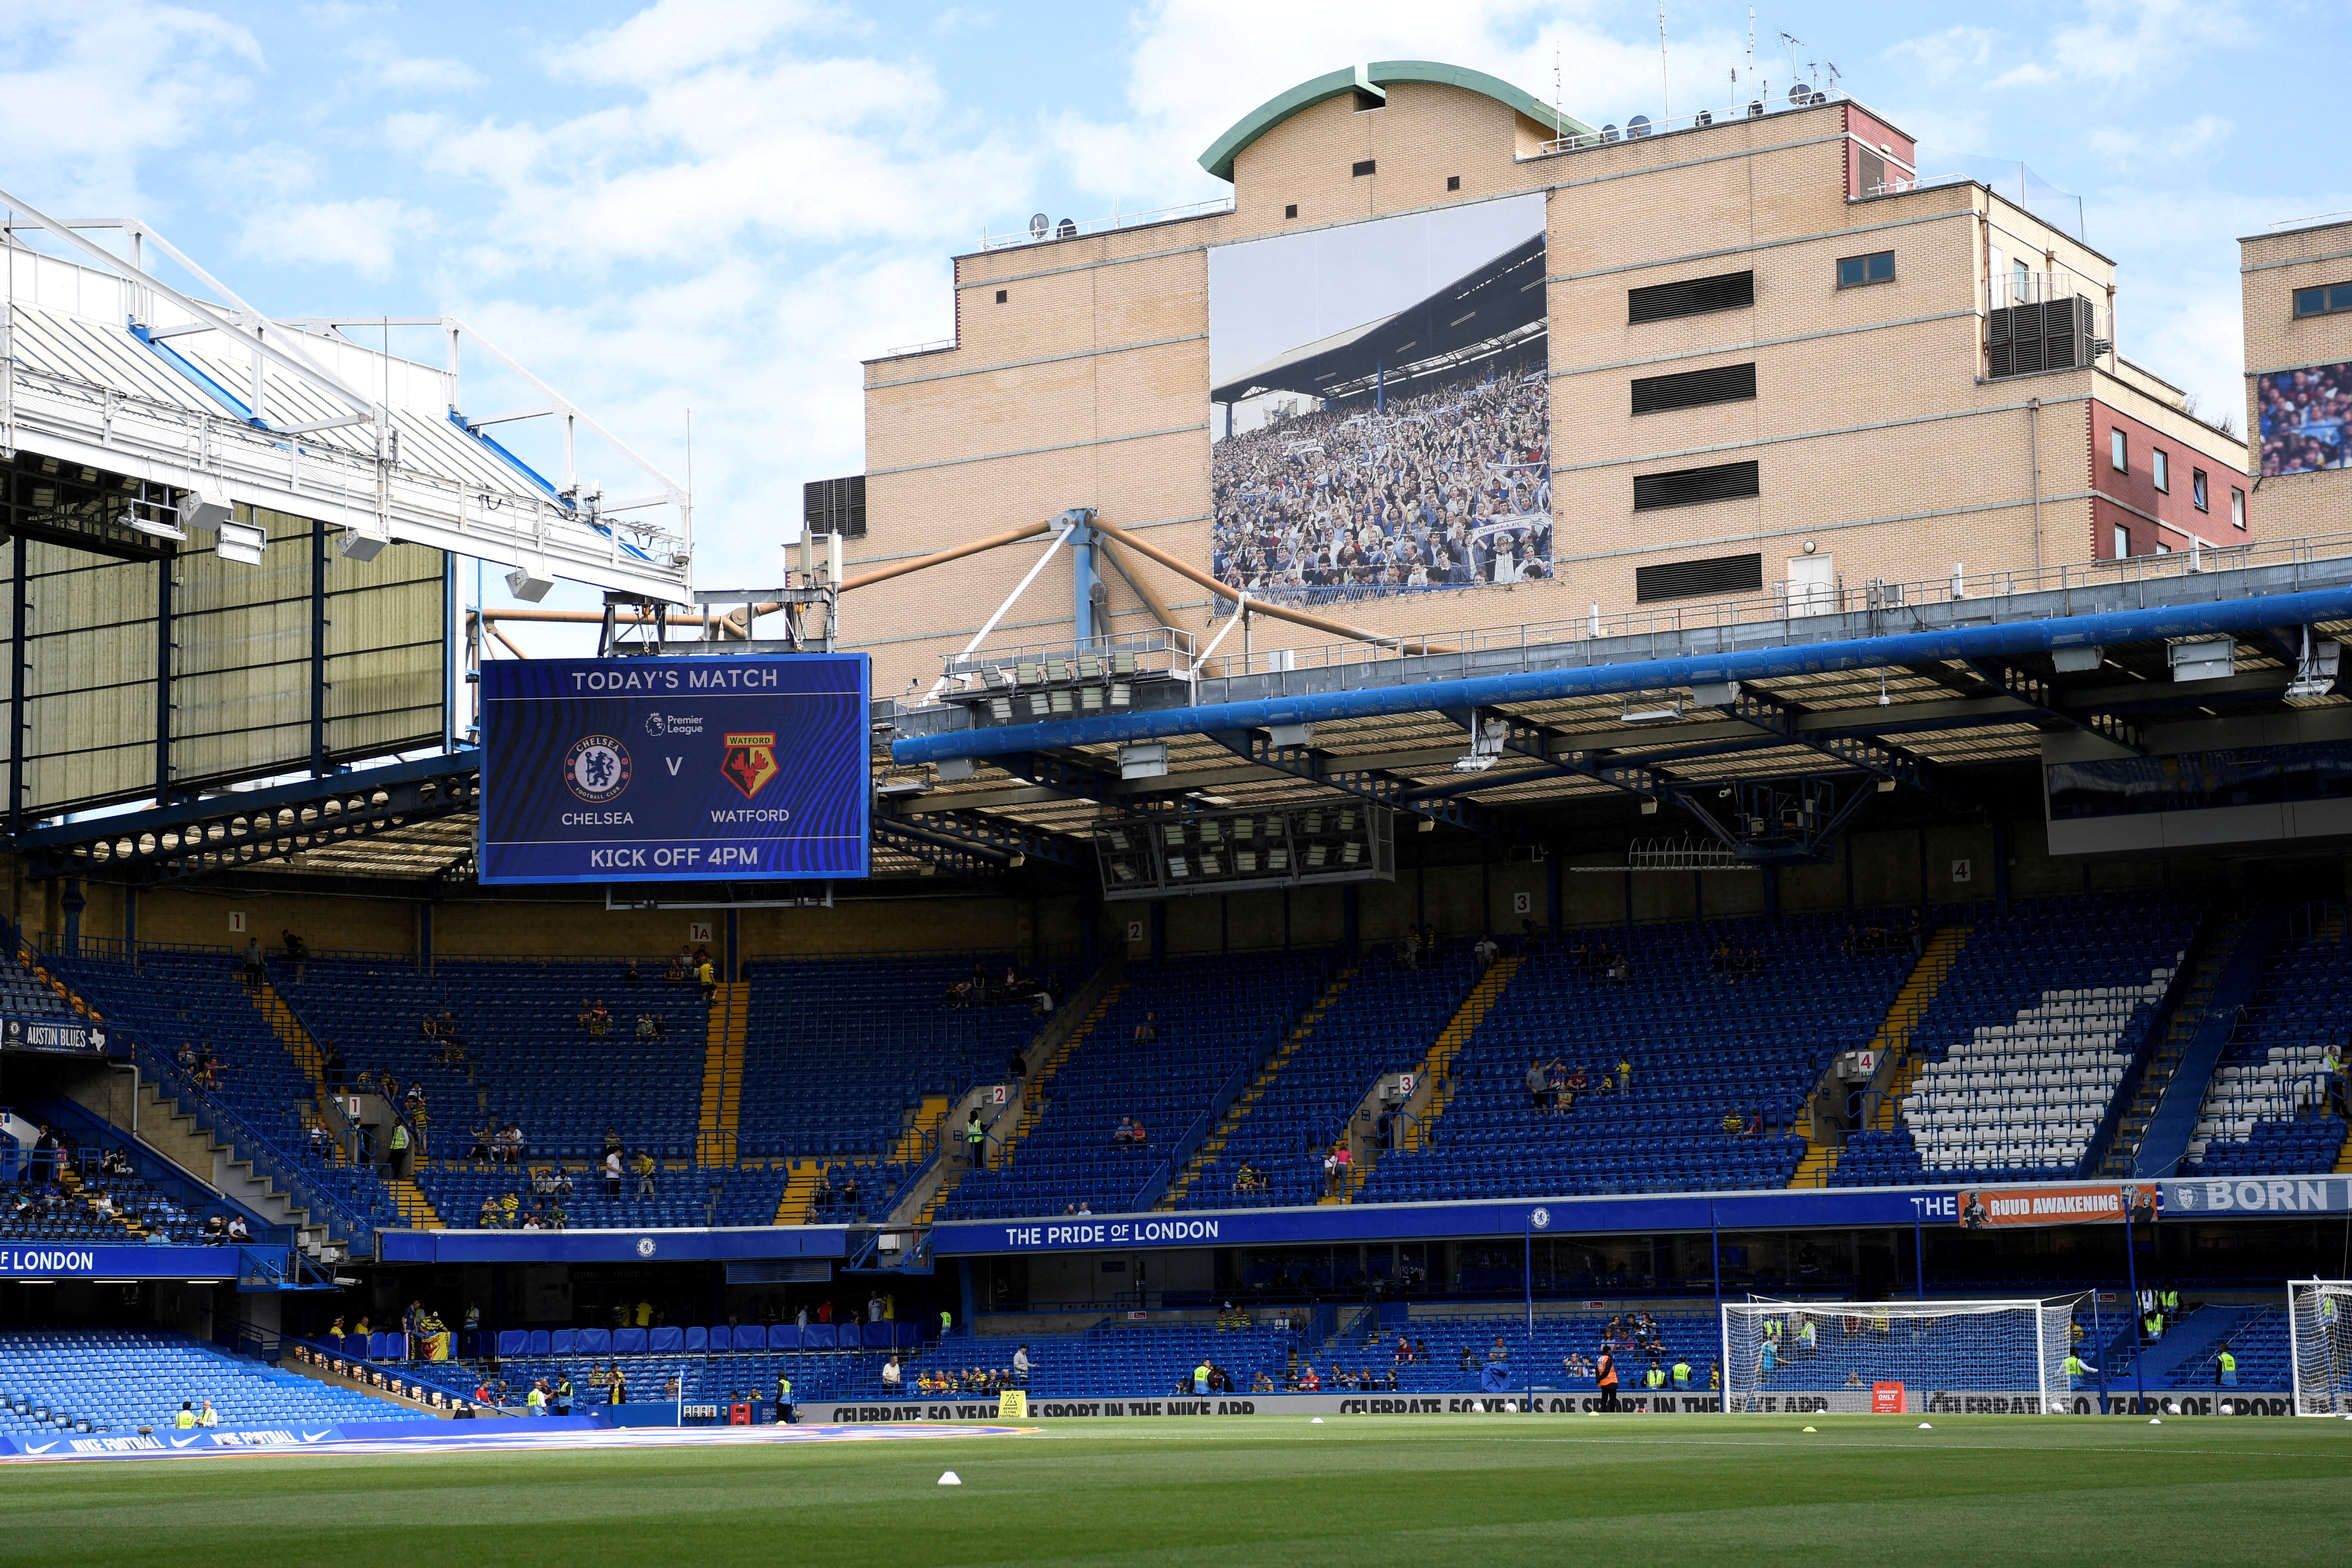 Abramovich completes Chelsea sale to Boehly-Clearlake consortium | Reuters